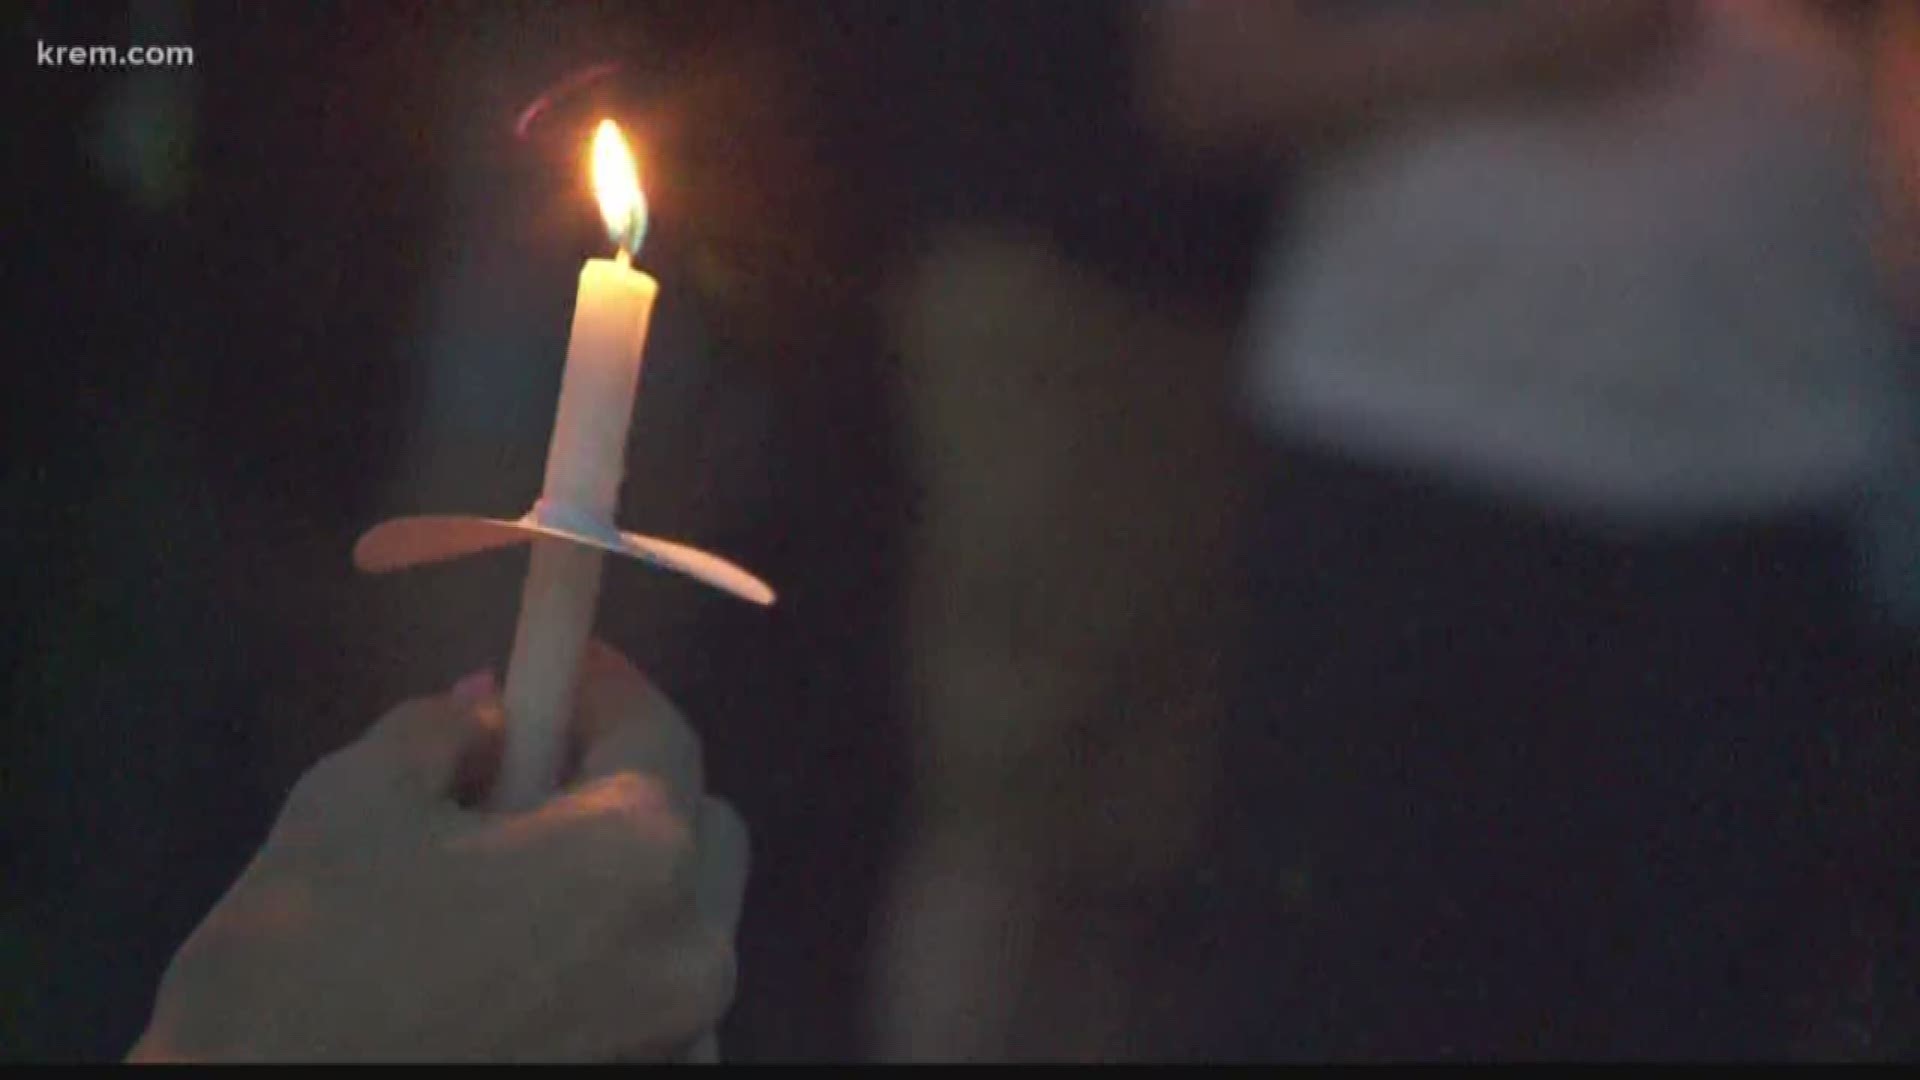 A vigil for Shianne Soles, who was killed in a shooting in Virginia last weekend, was held at Independence Point on Lake CDA on Saturday evening.